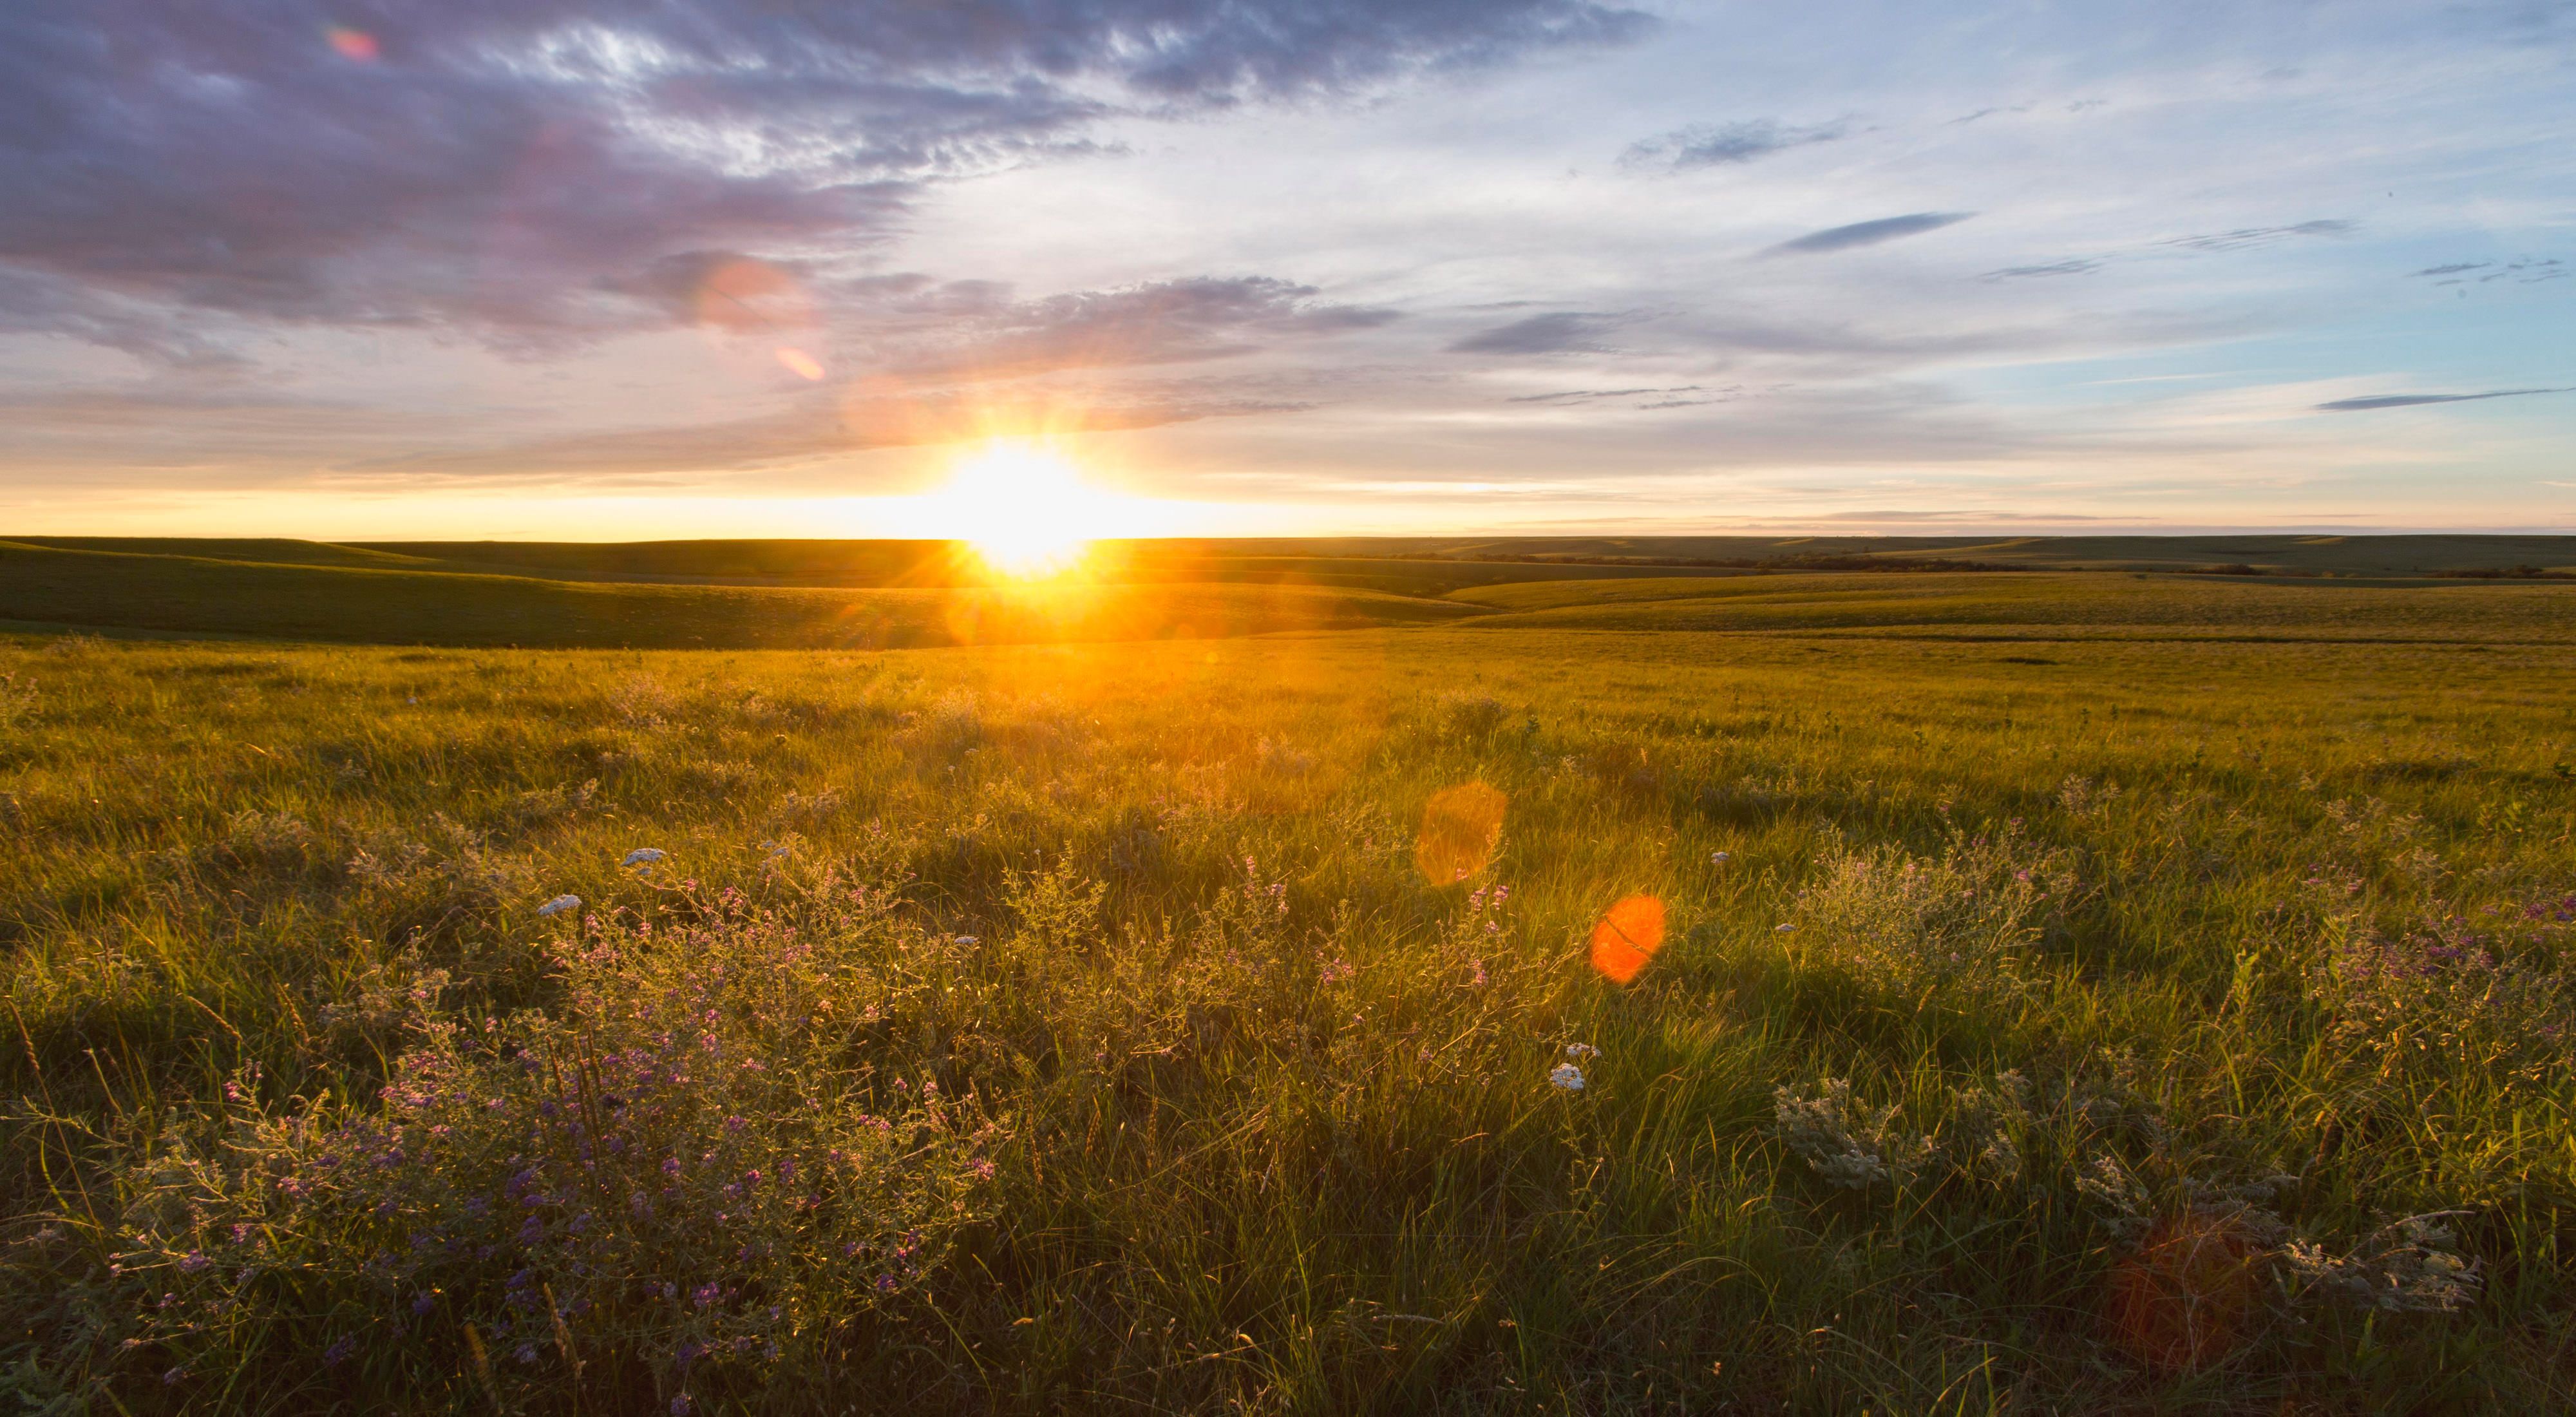 Sun setting on a hilly horizon of lush grass and flowers.